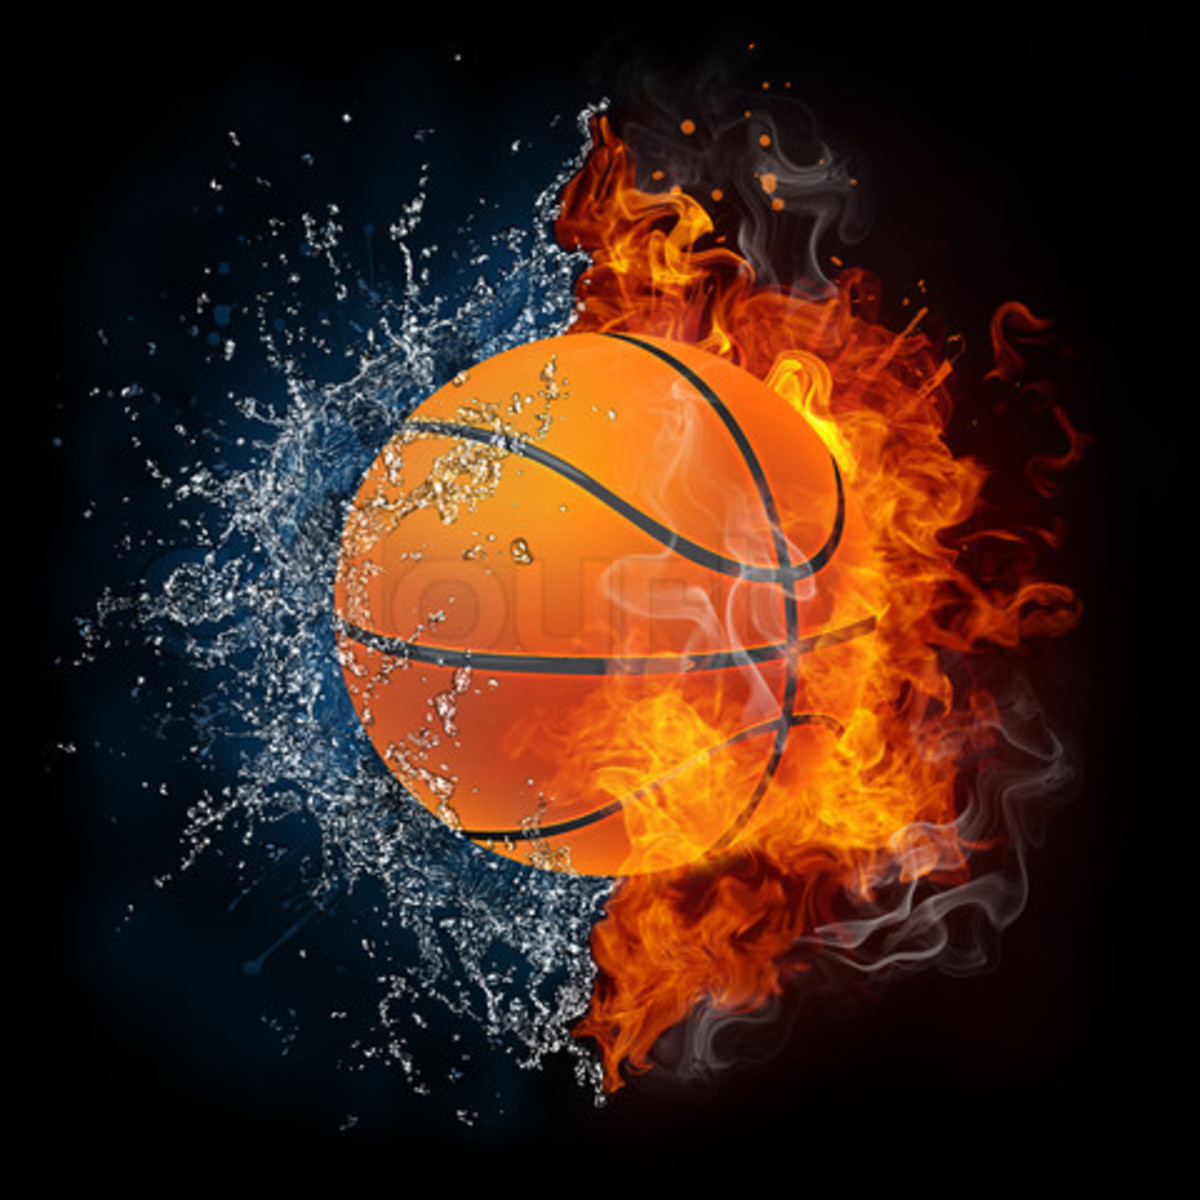 Basketball Ball in Fire and Water Isolated on the Black Background